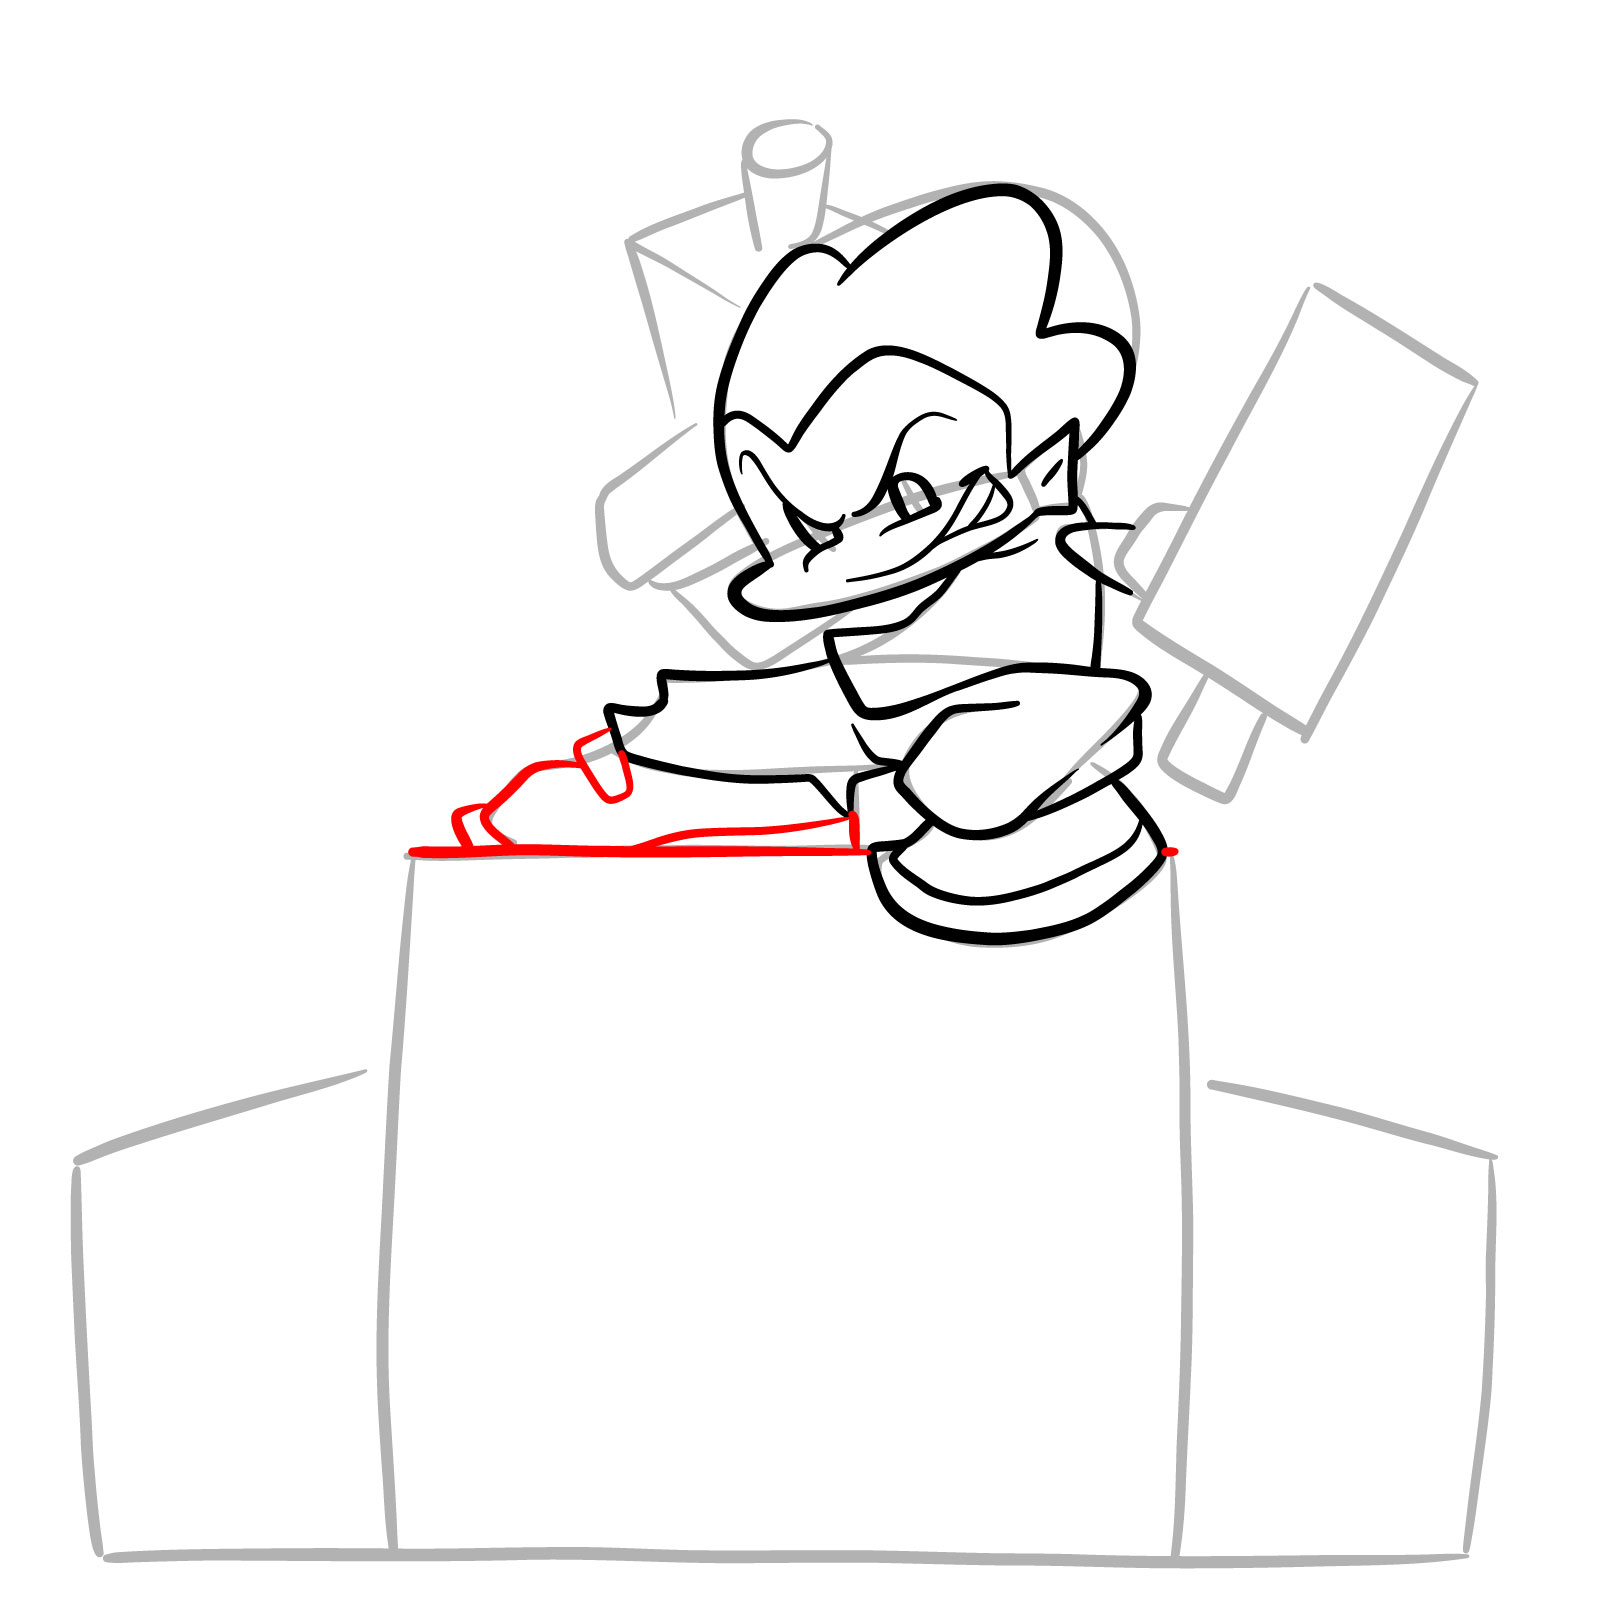 How to draw Pico on the speakers - step 15